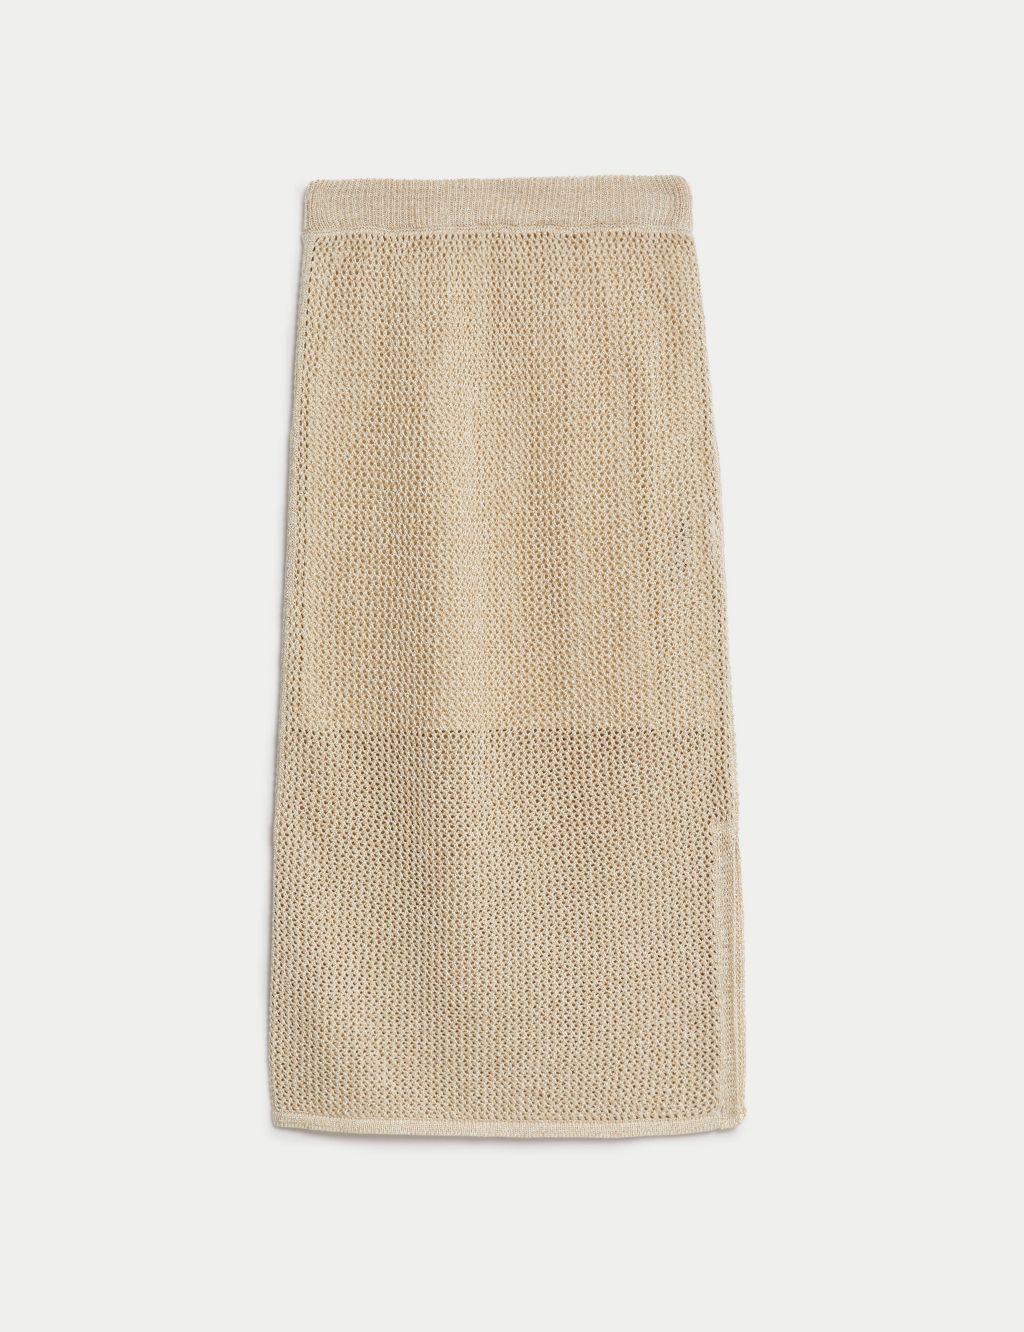 Cotton Blend Sparkly Textured Knitted Skirt image 1